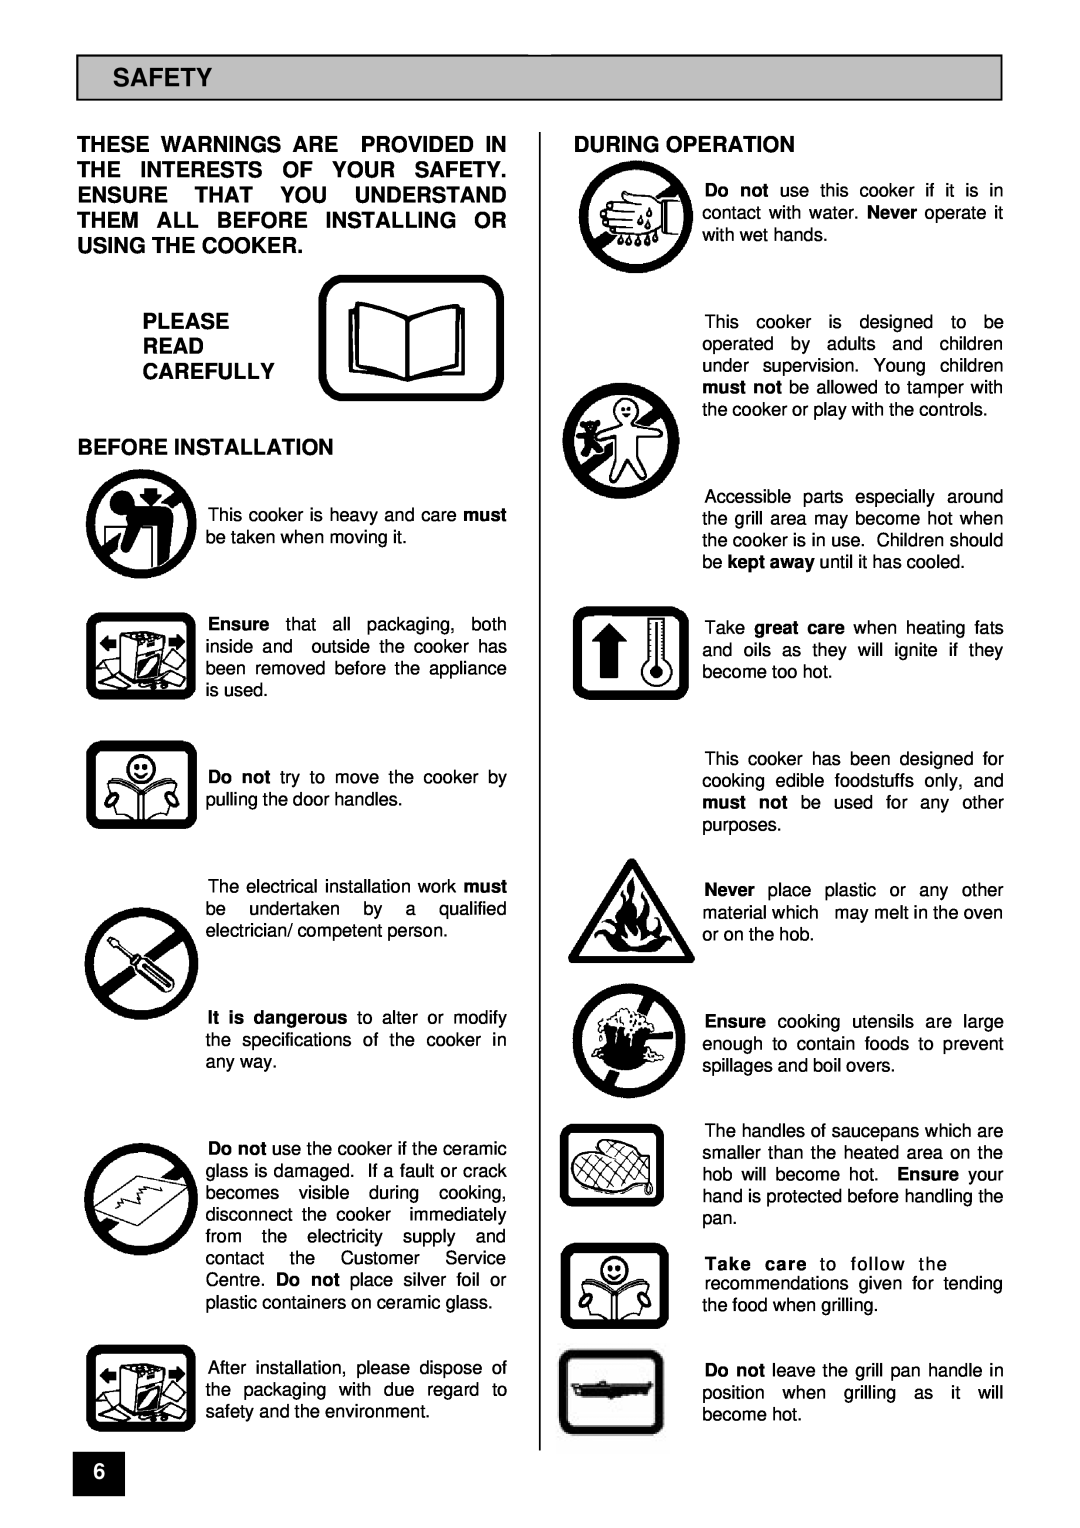 Zanussi ZCE 7400 manual Safety, Please Read Carefully Before Installation, During Operation 